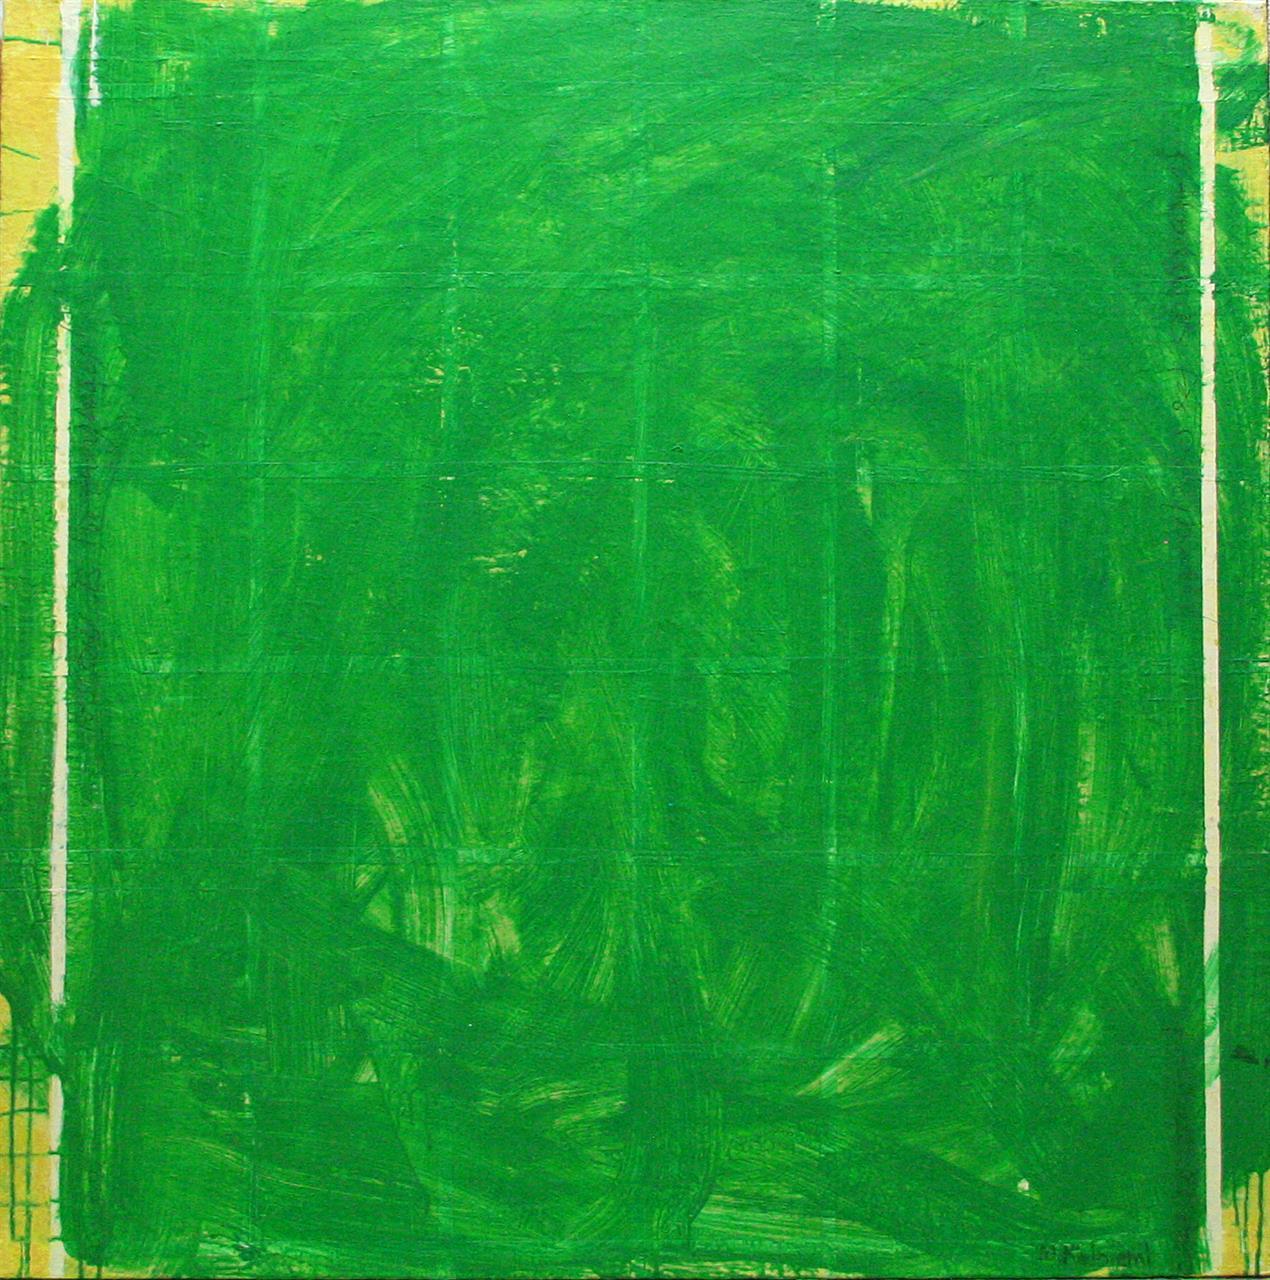 PAINTING OVER WITH GREEN COLOUR 100x100cm 2013